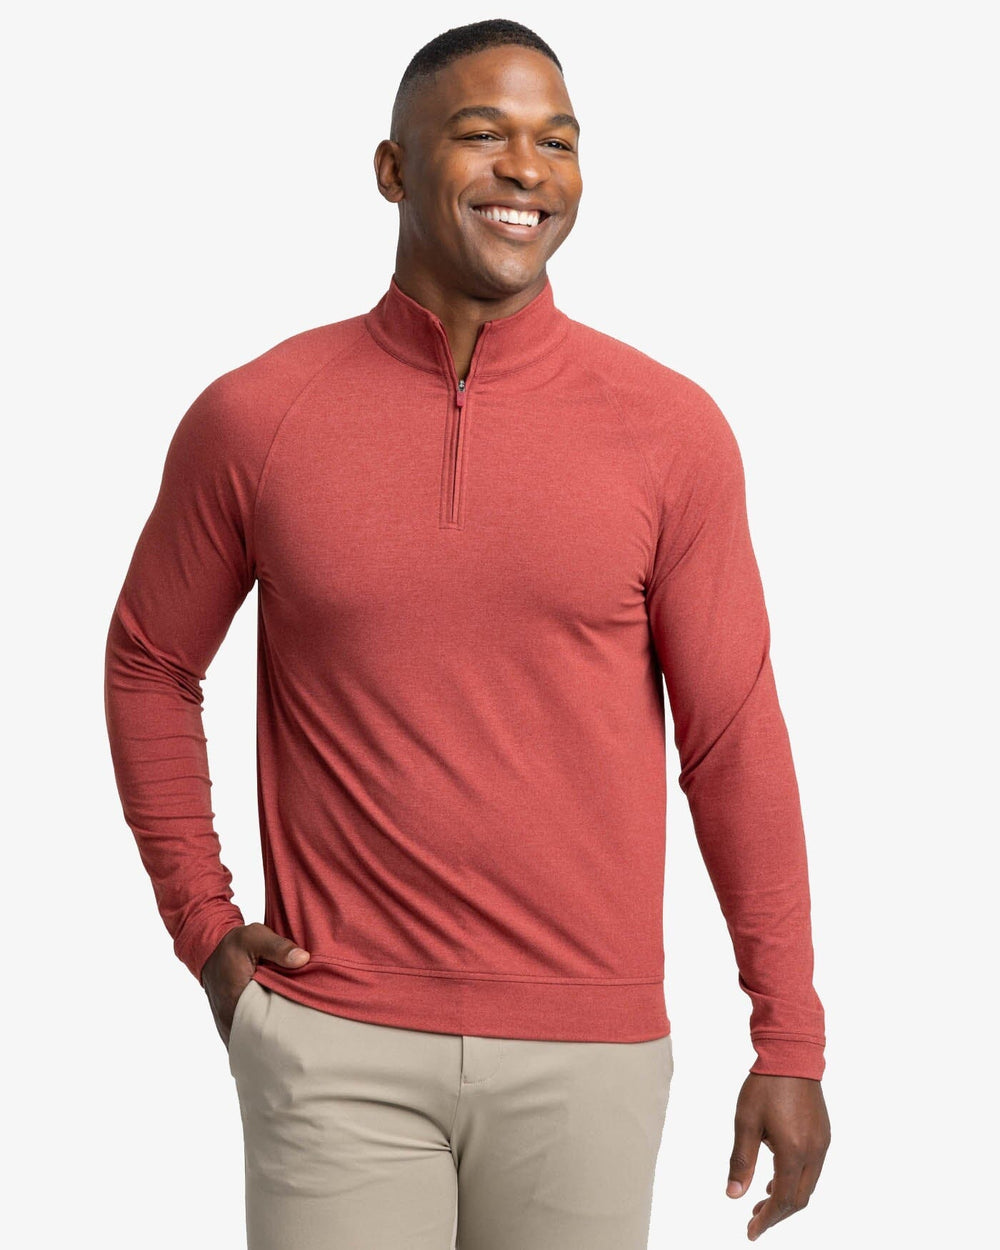 The front view of the Southern Tide Cruiser Heather Quarter Zip Pullover by Southern Tide - Heather Tuscany Red